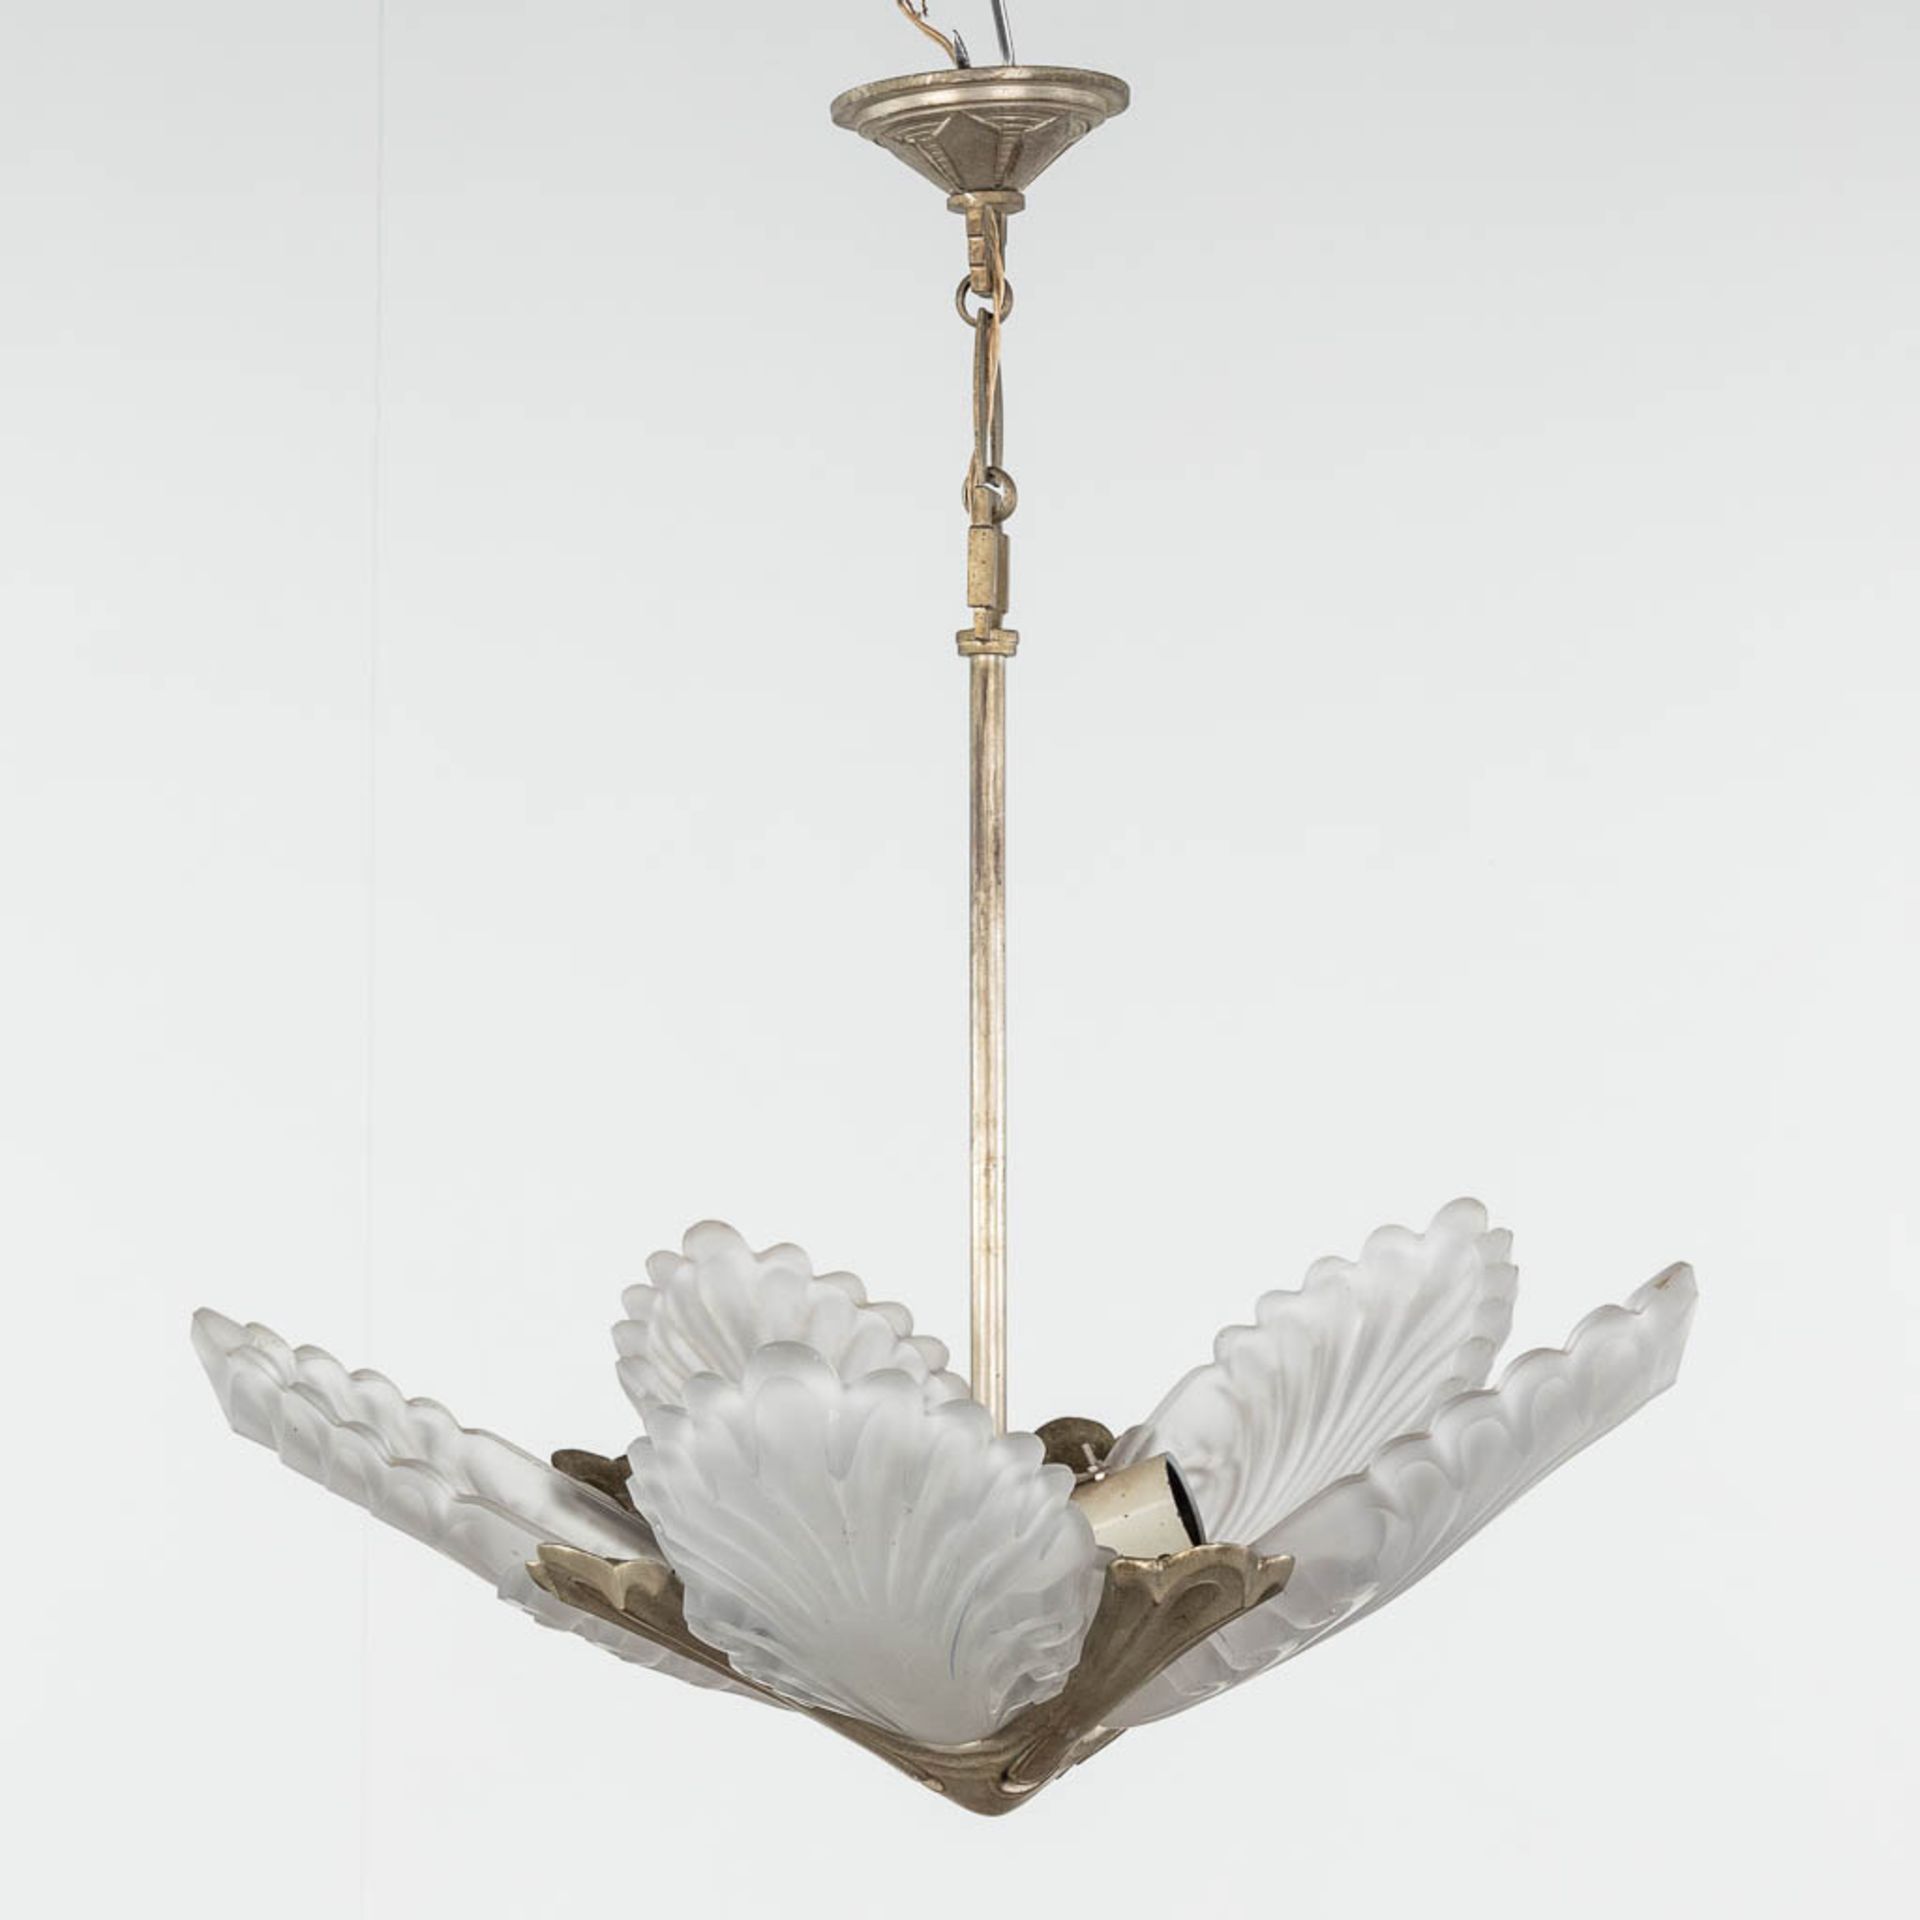 A chandelier, silver-plated metal and glass, art deco. Circa 1930. (H:50 x D:50 cm)